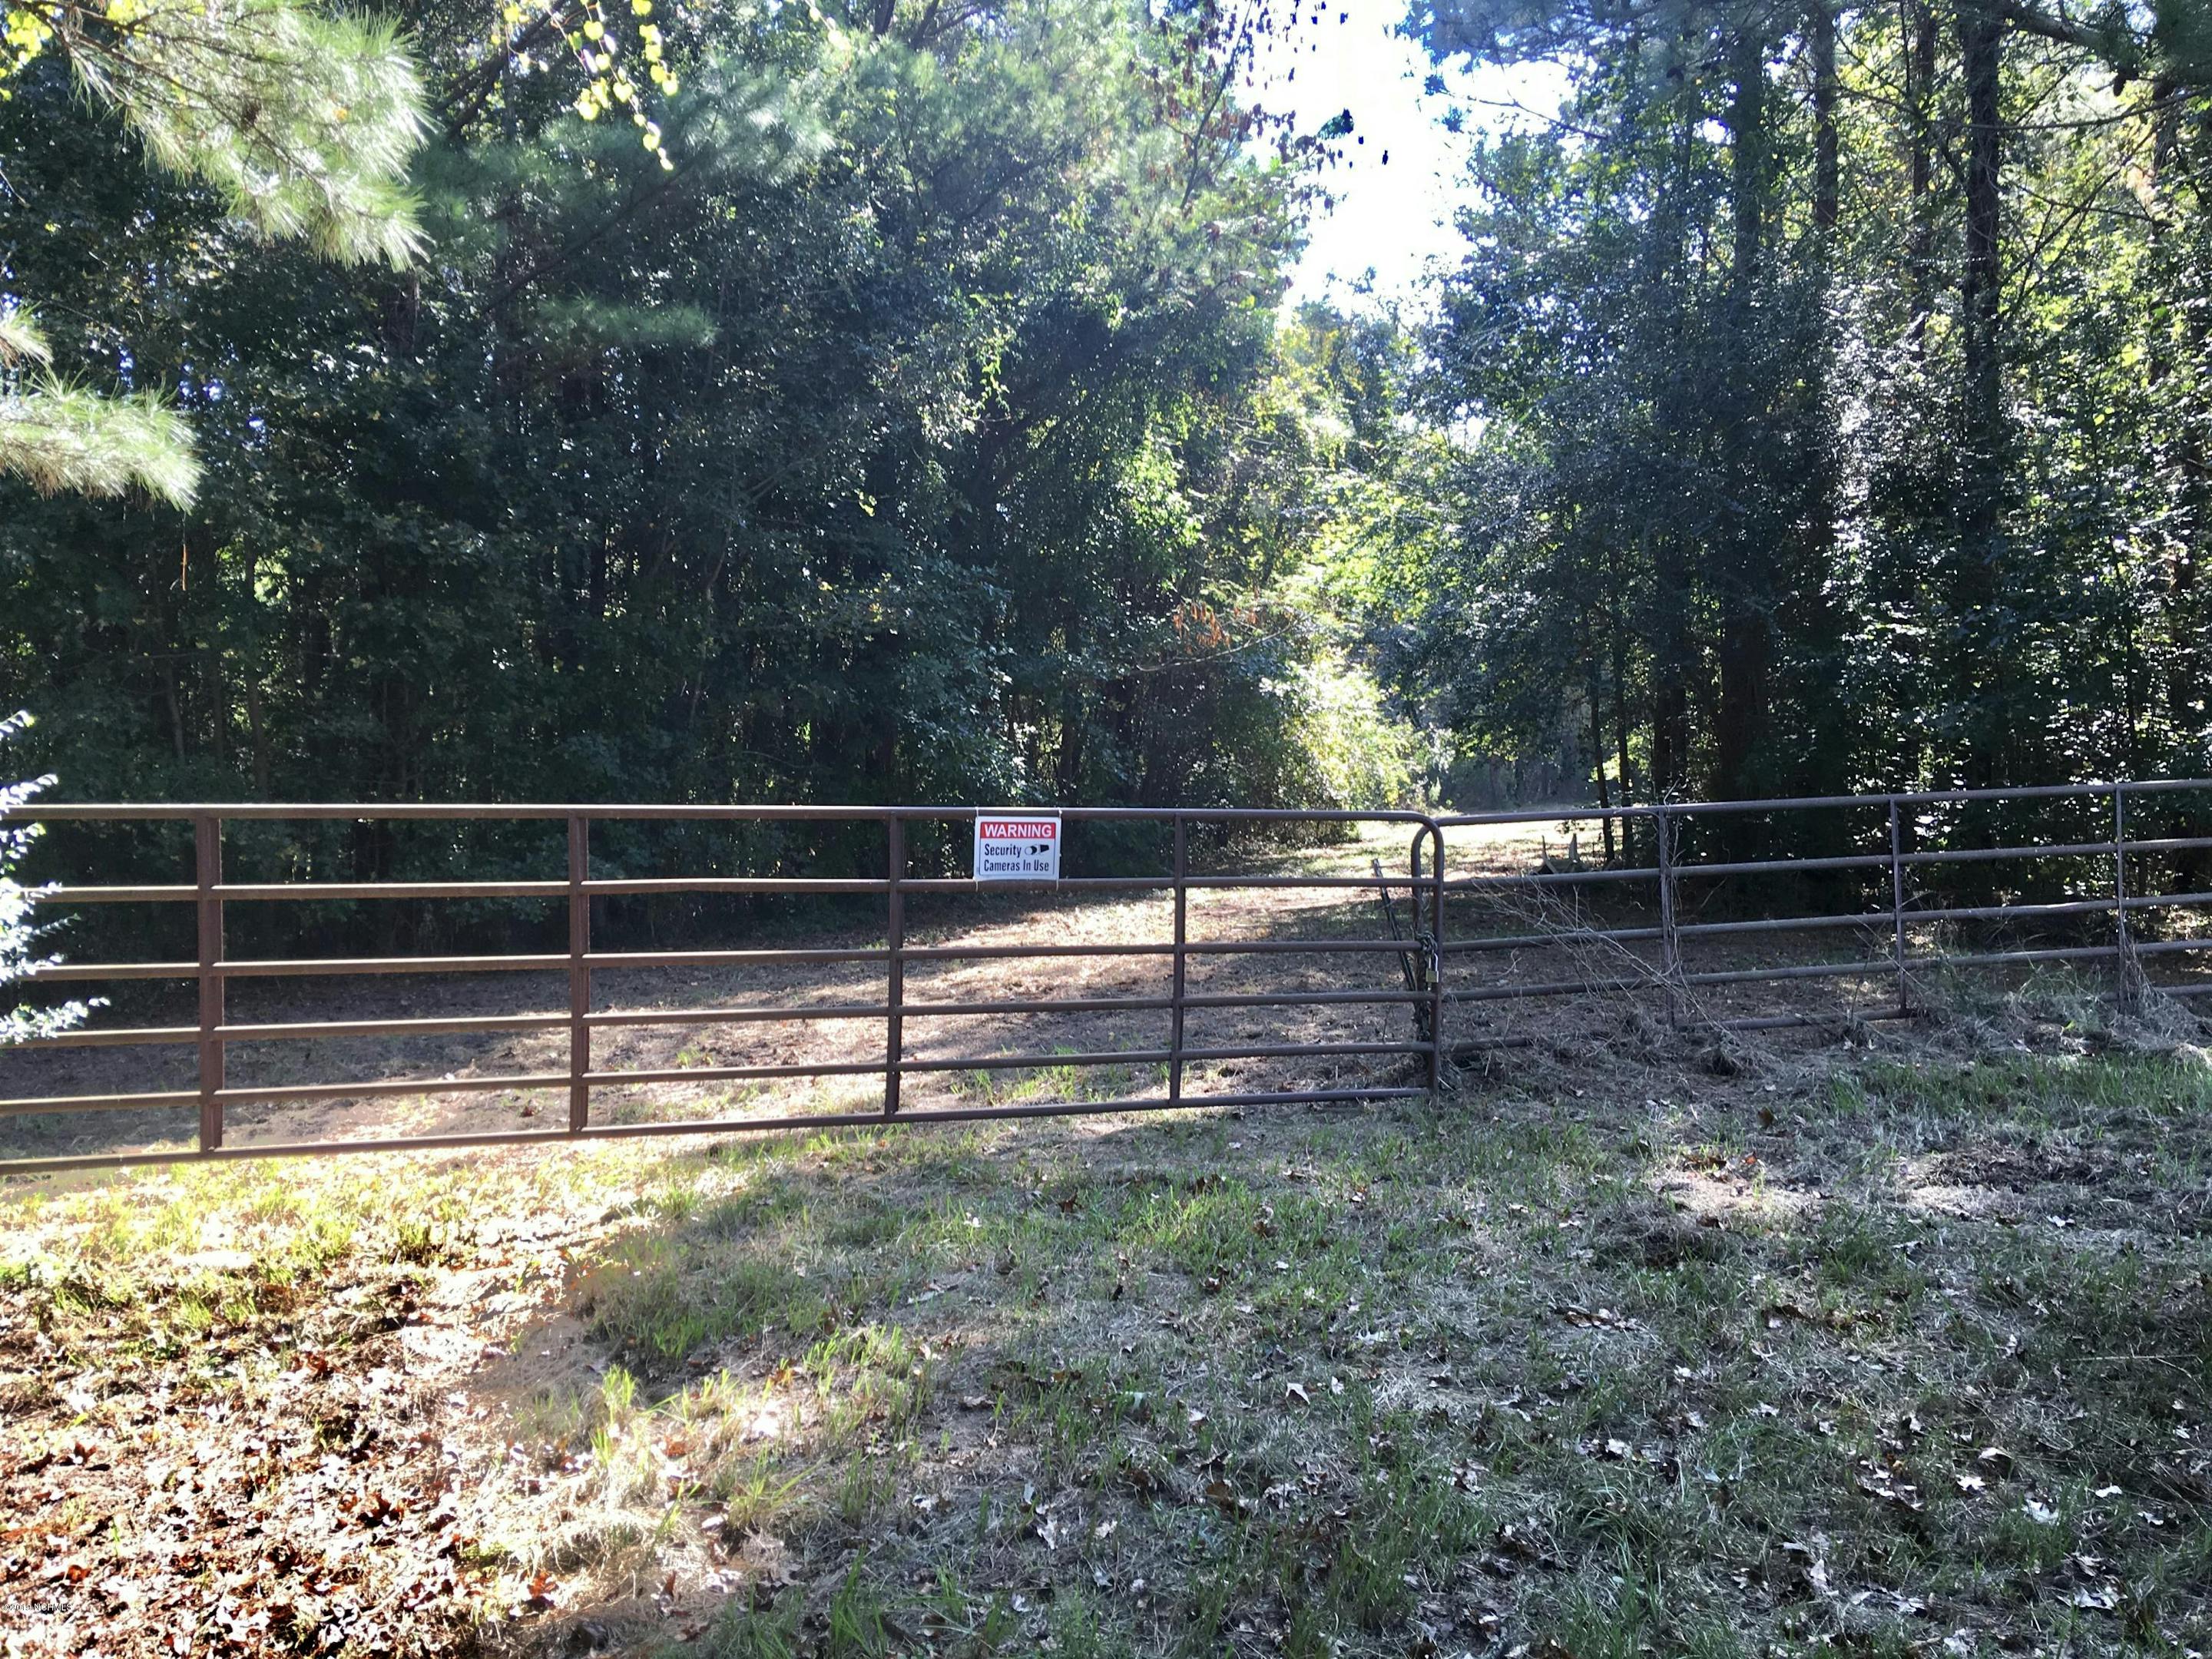 Entrance to the Property